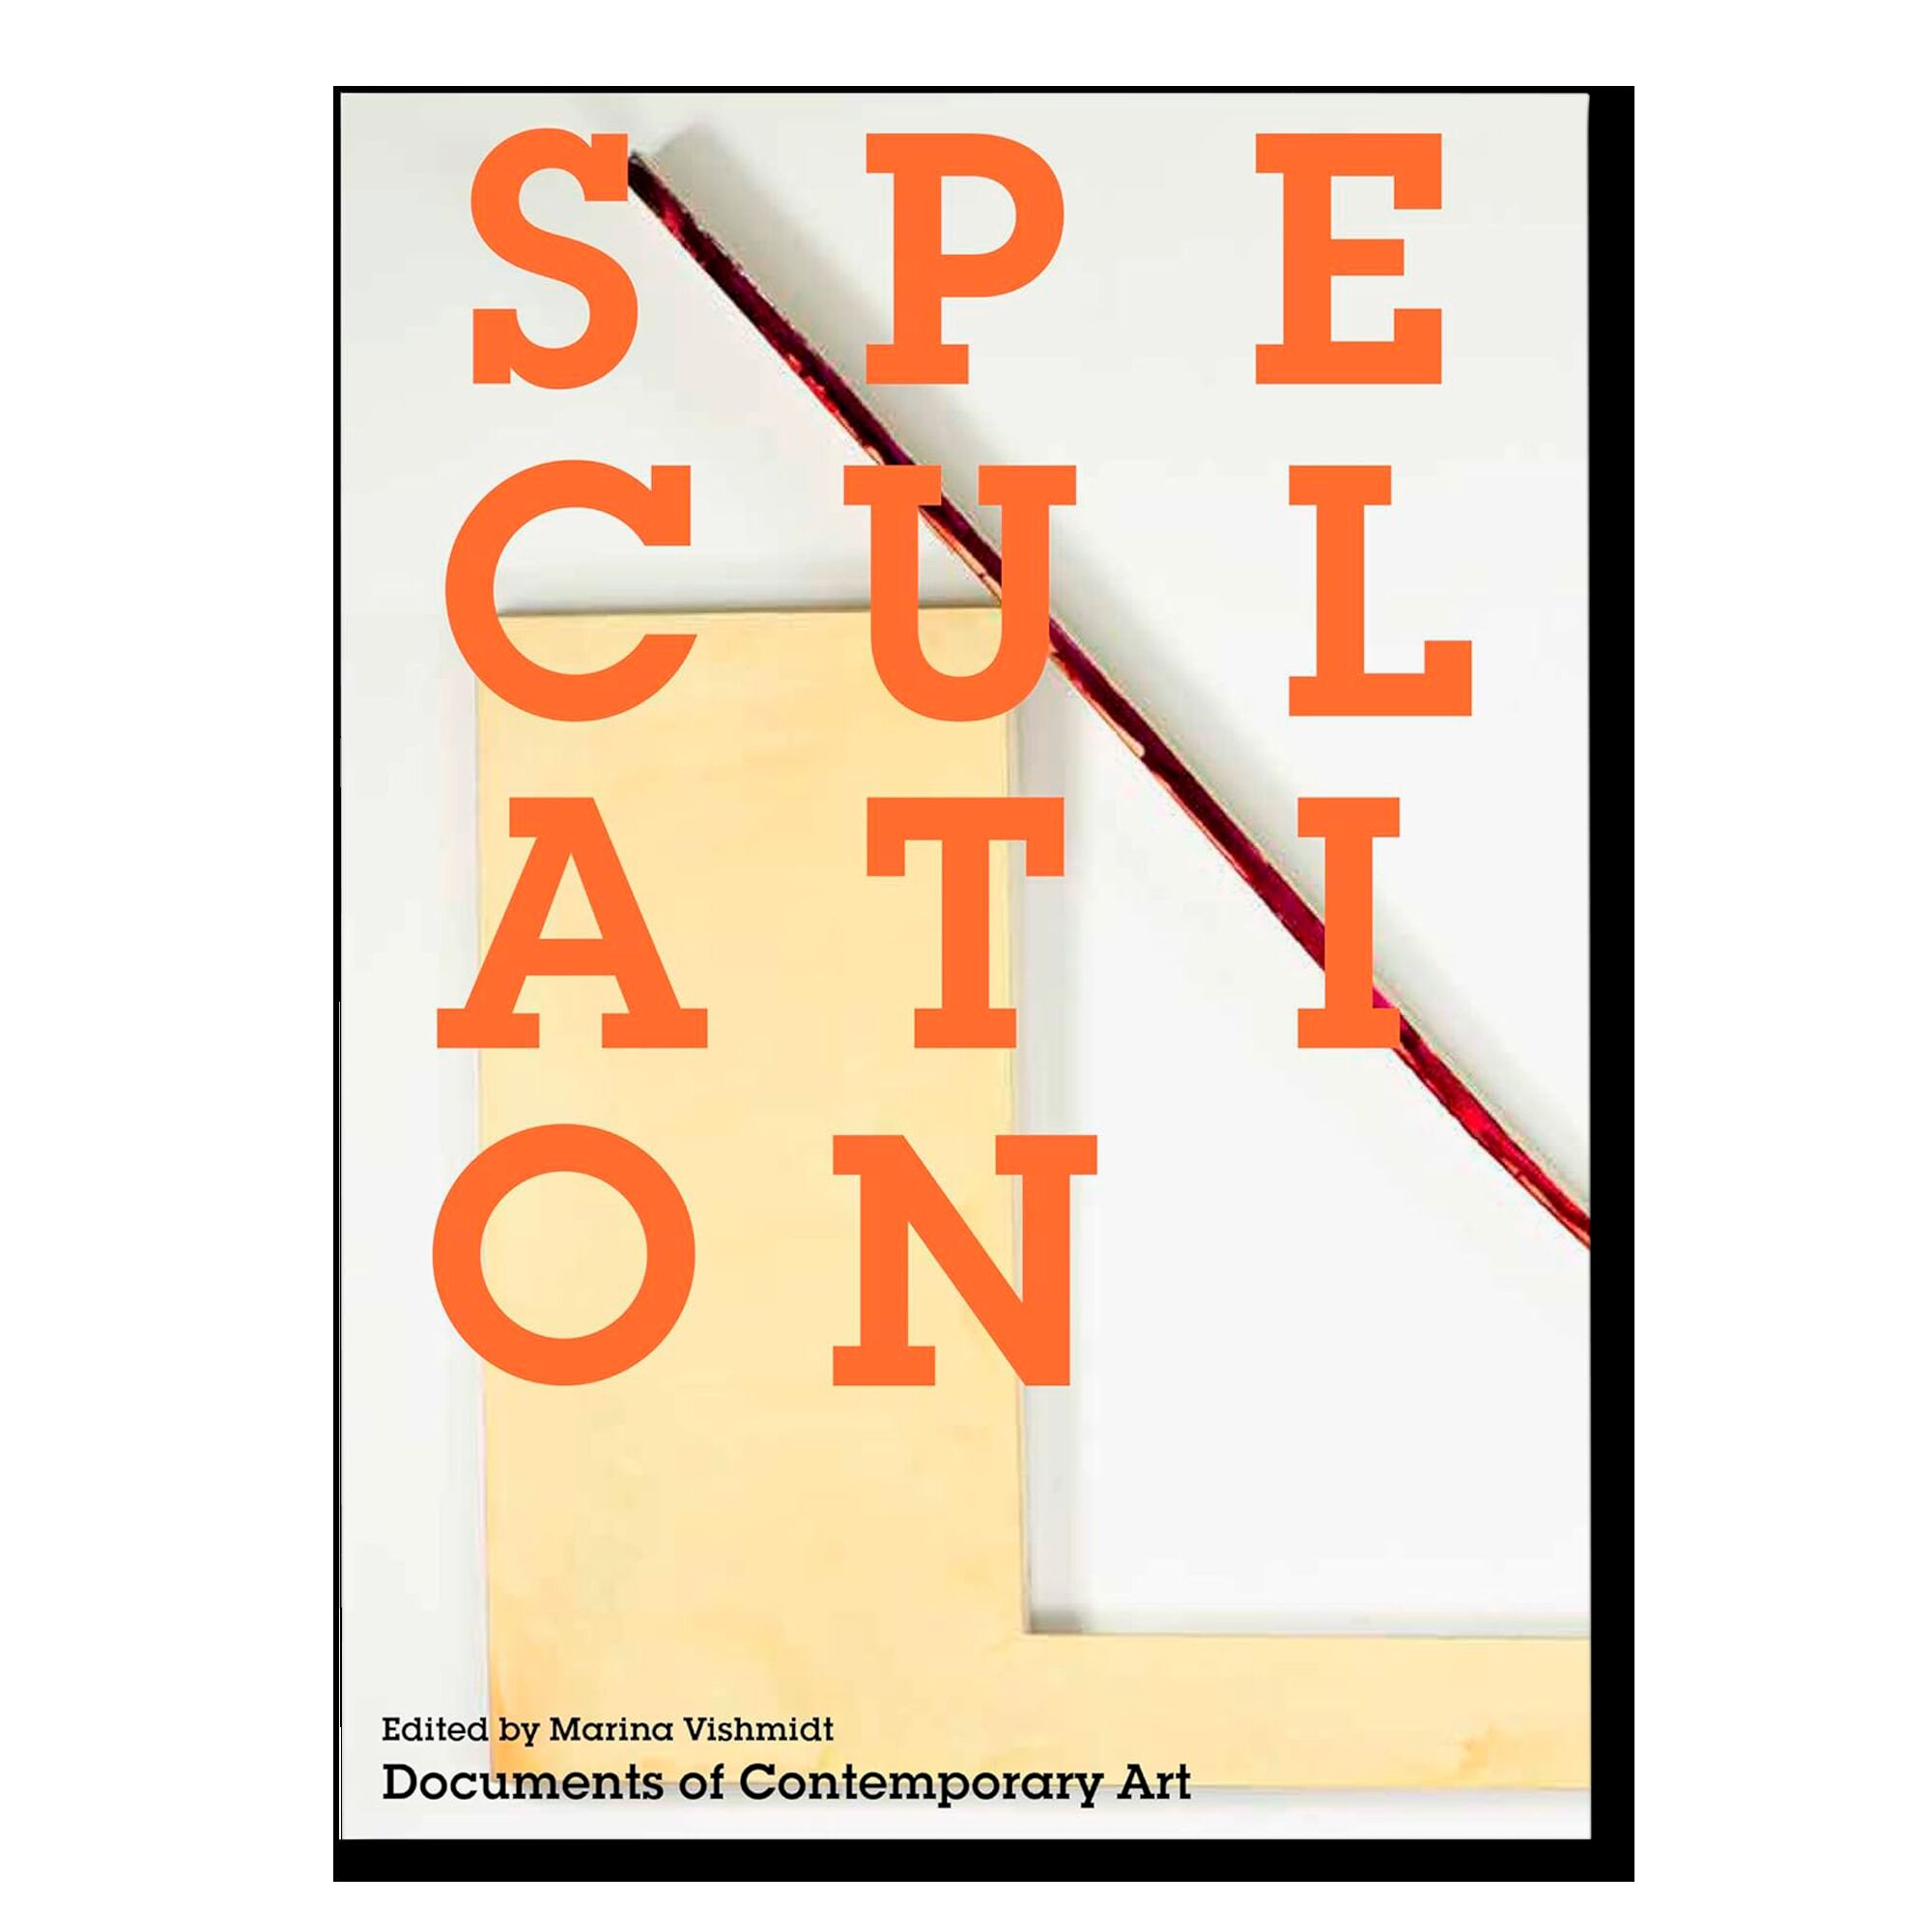 Speculation: Documents of Contemporary Art